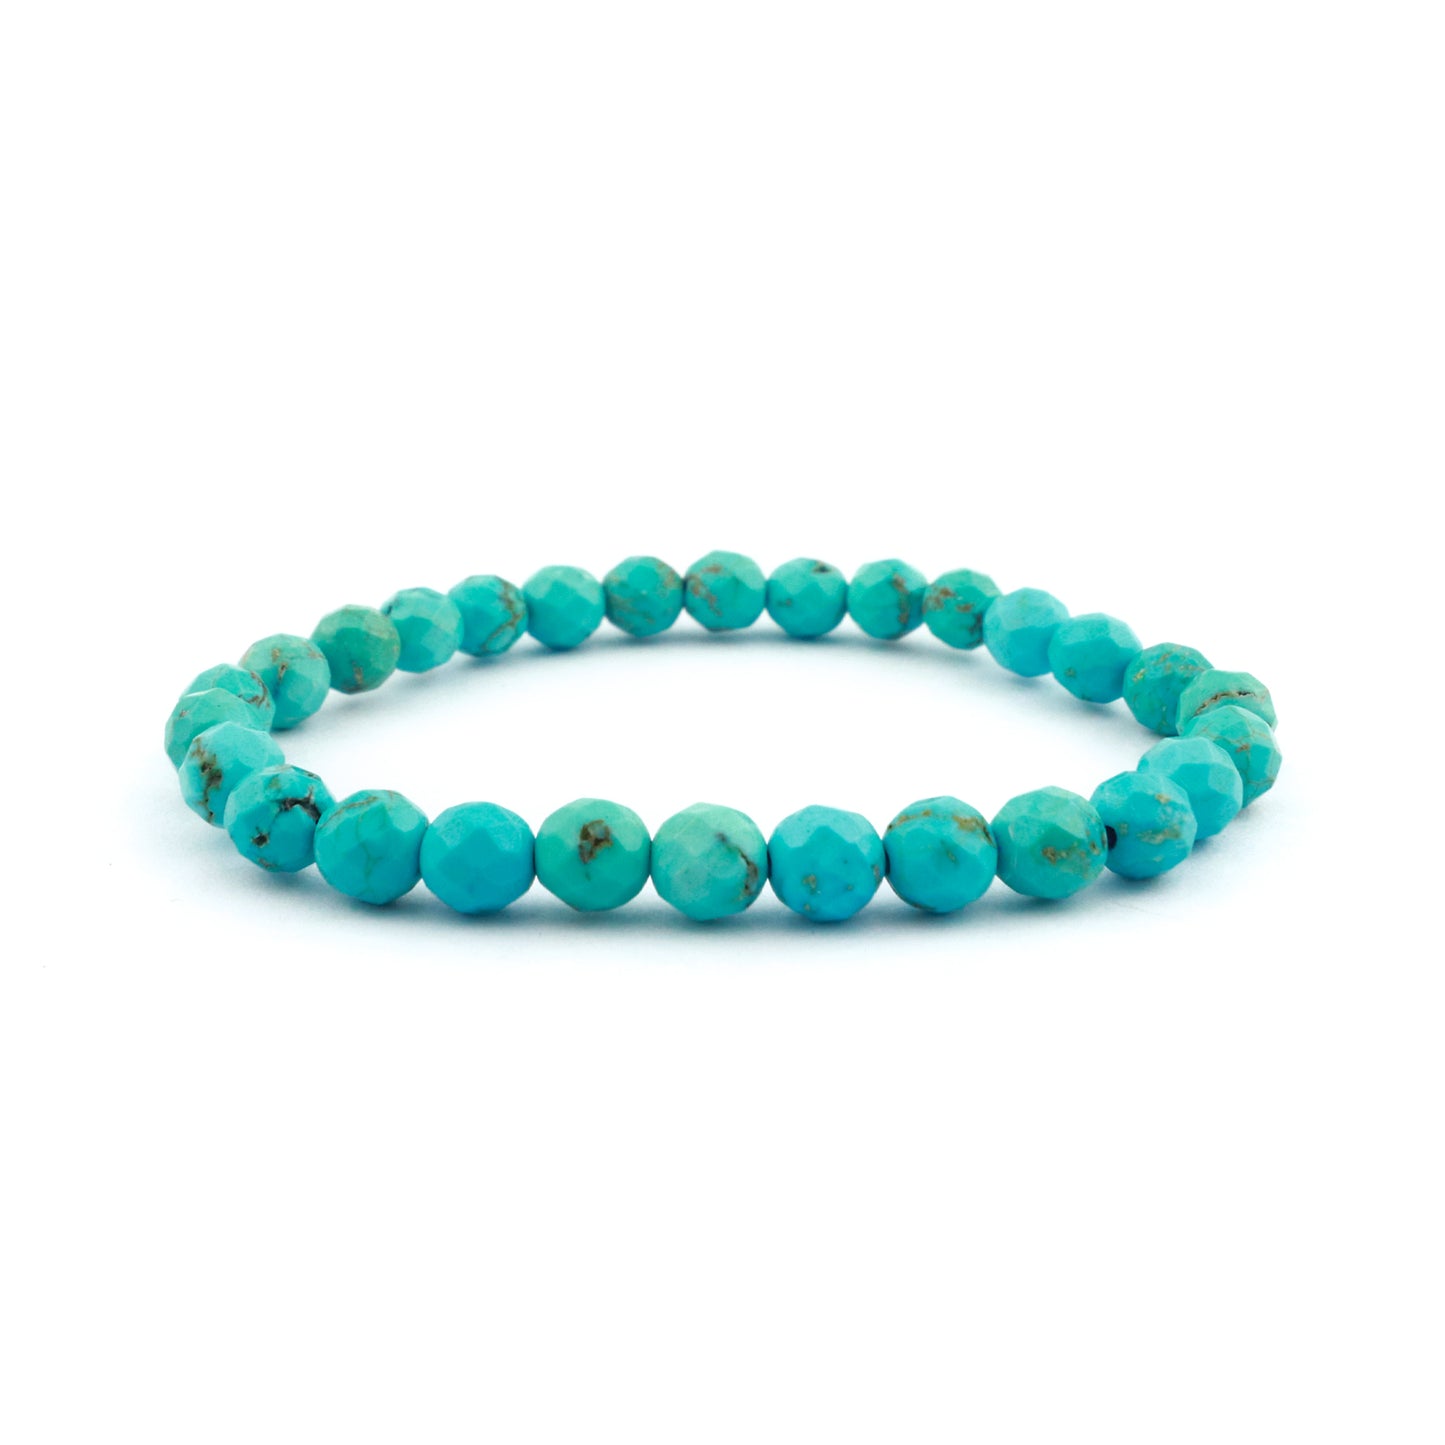 Faceted Turquoise Magnesite Stretch Bracelet 6mm